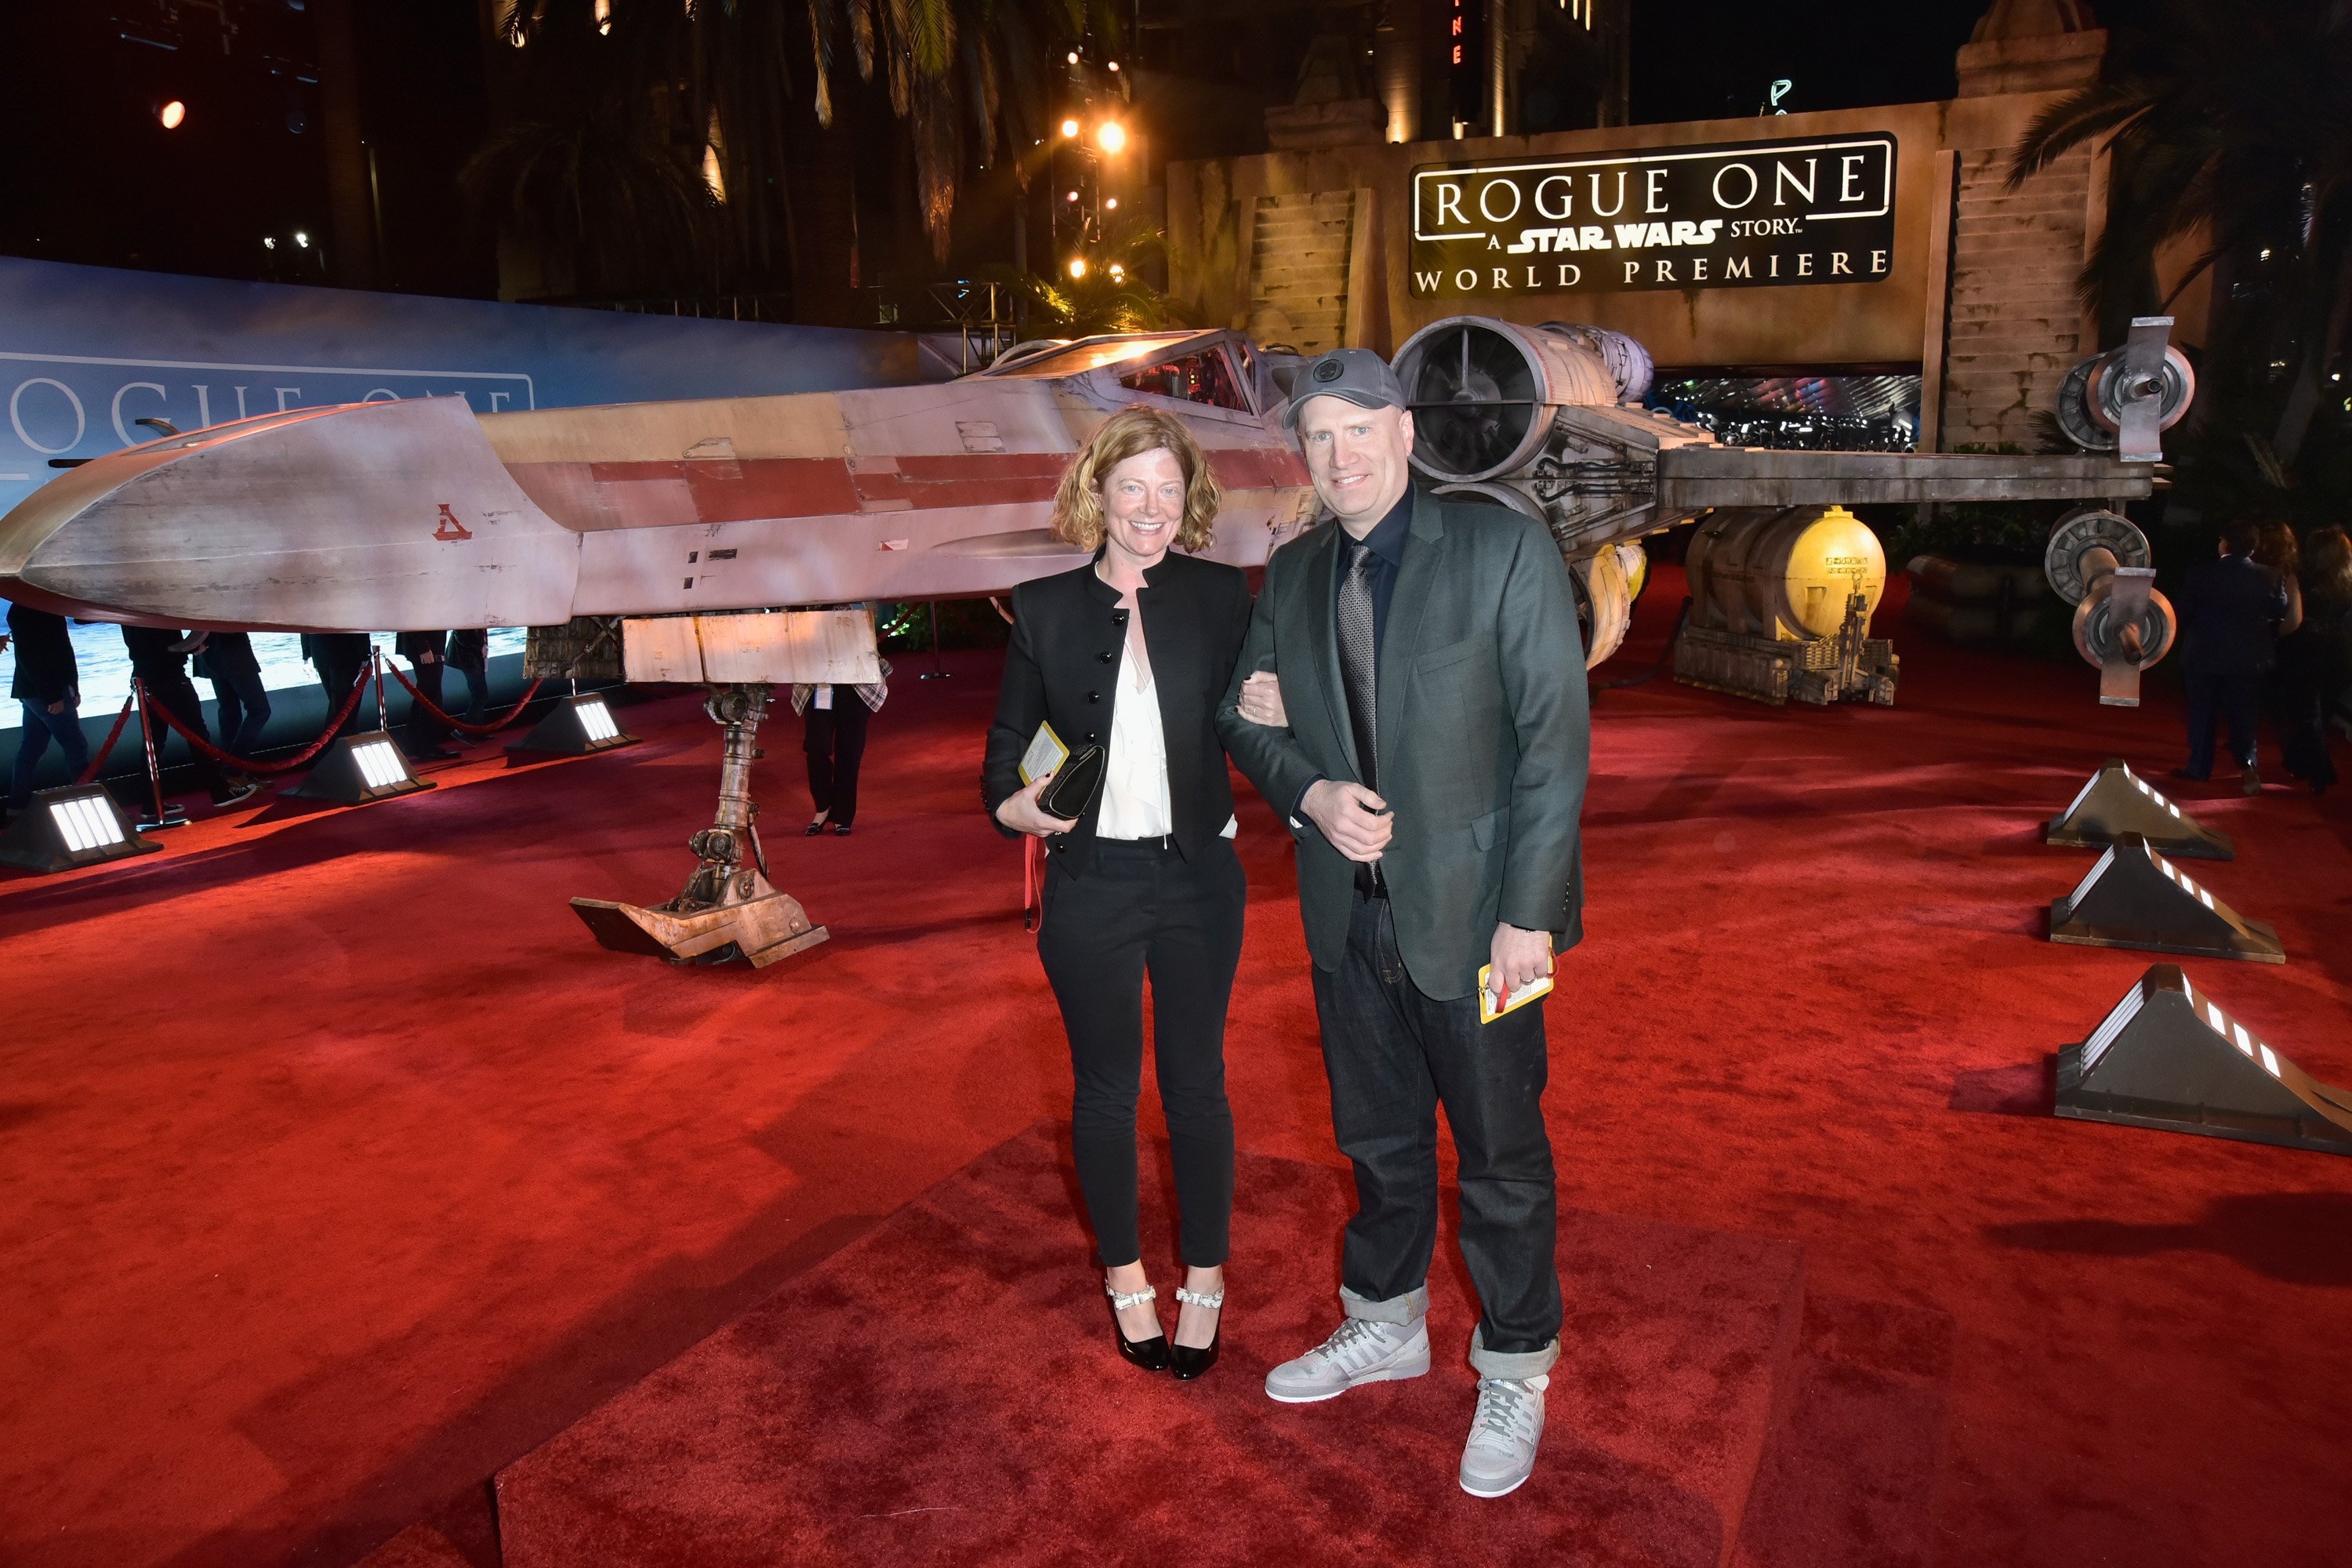 Marvel boss Kevin Feige and Caitlin Feige attend the movie premiere of Rogue One: A Star Wars Story